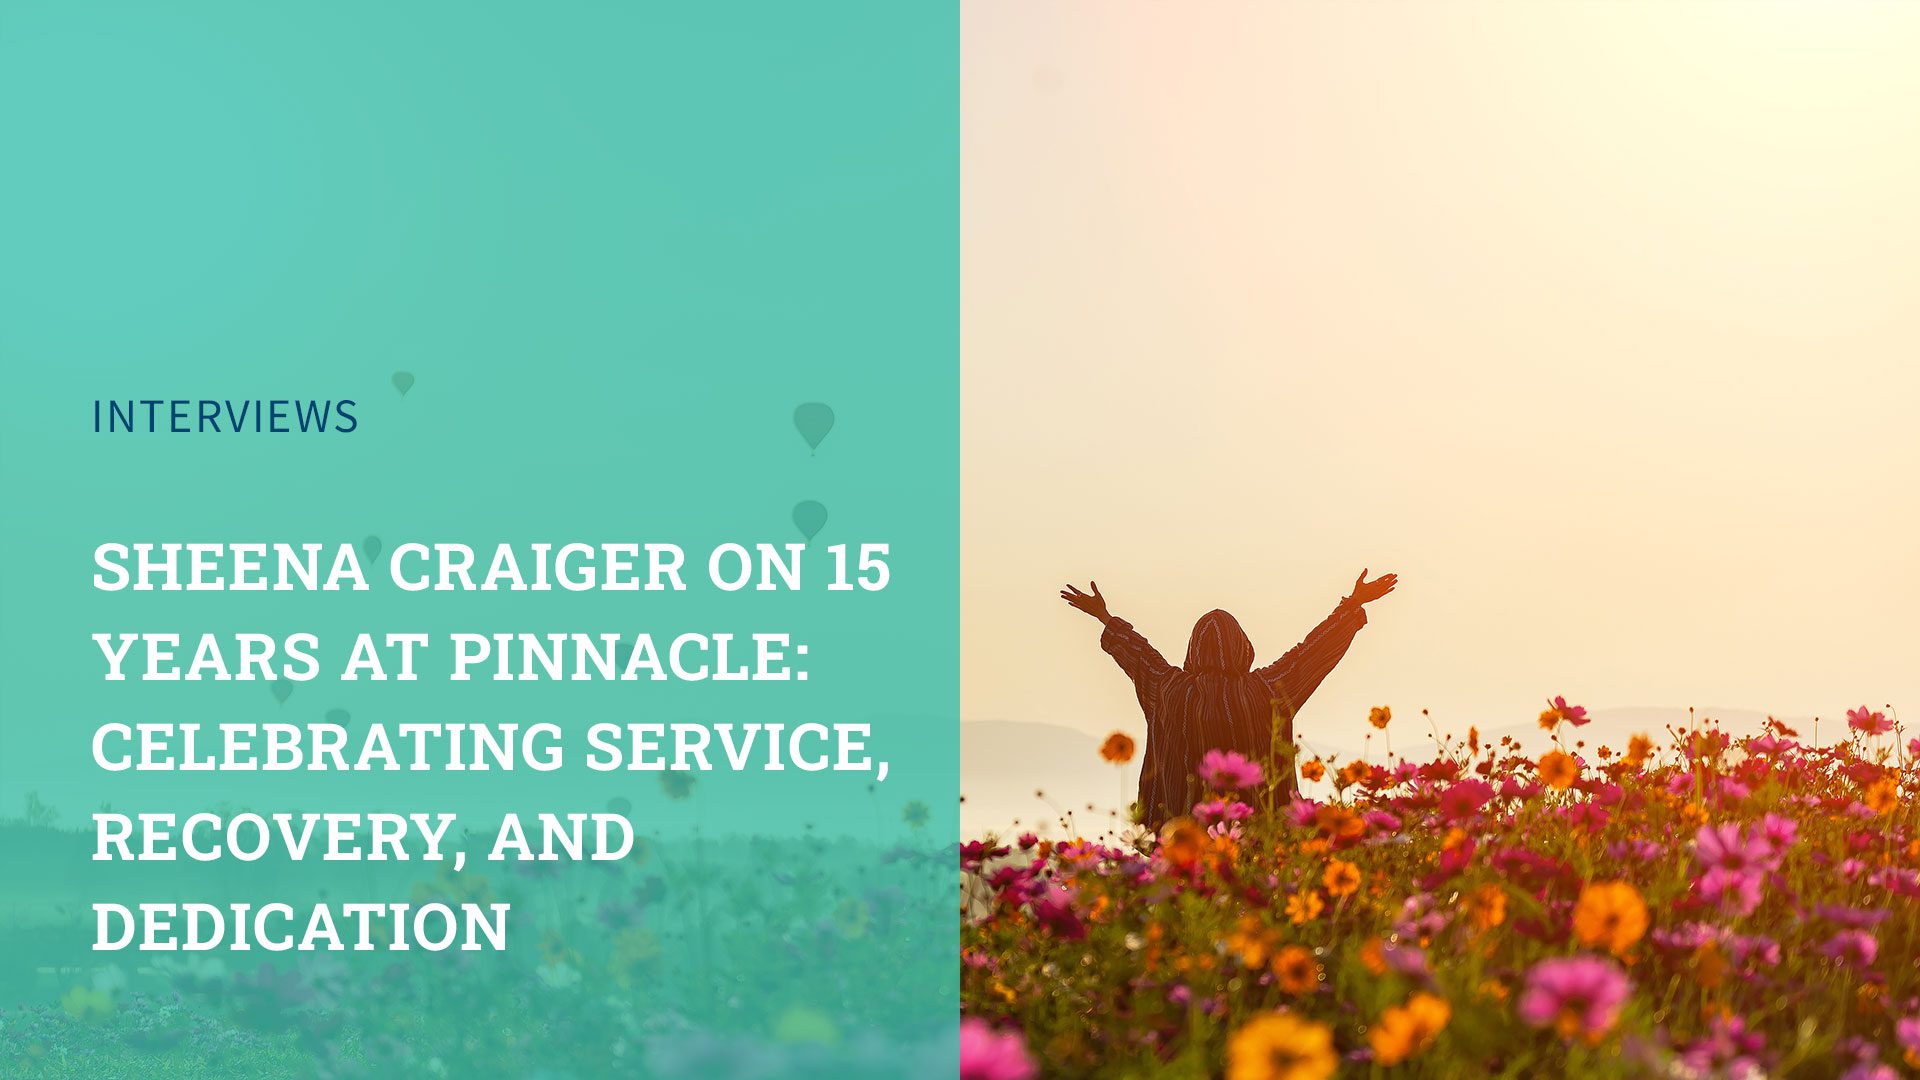 Sheena Craiger on 15 Years at Pinnacle: Celebrating service, recovery, and dedication